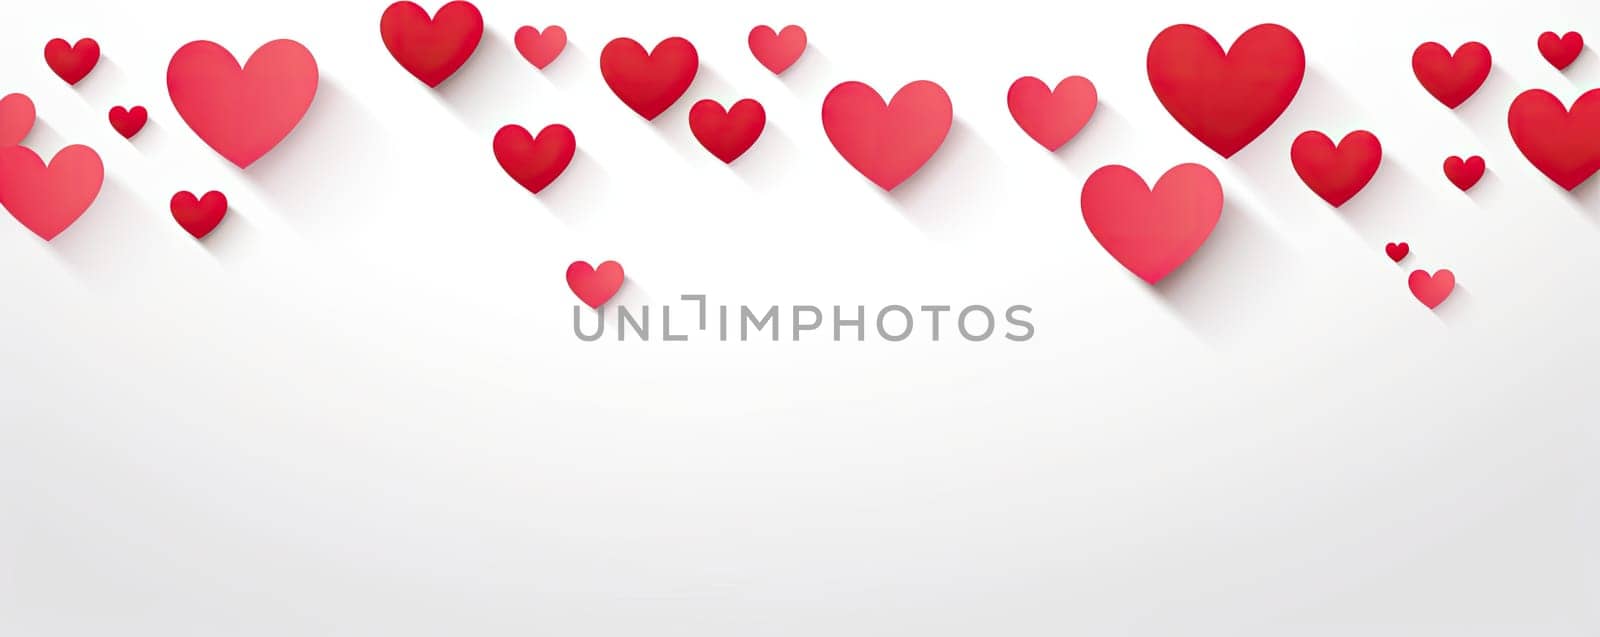 A romantic banner with many red and pink hearts on a fresh white background is a great decoration for Valentine's Day, filling the space with warmth and tenderness.